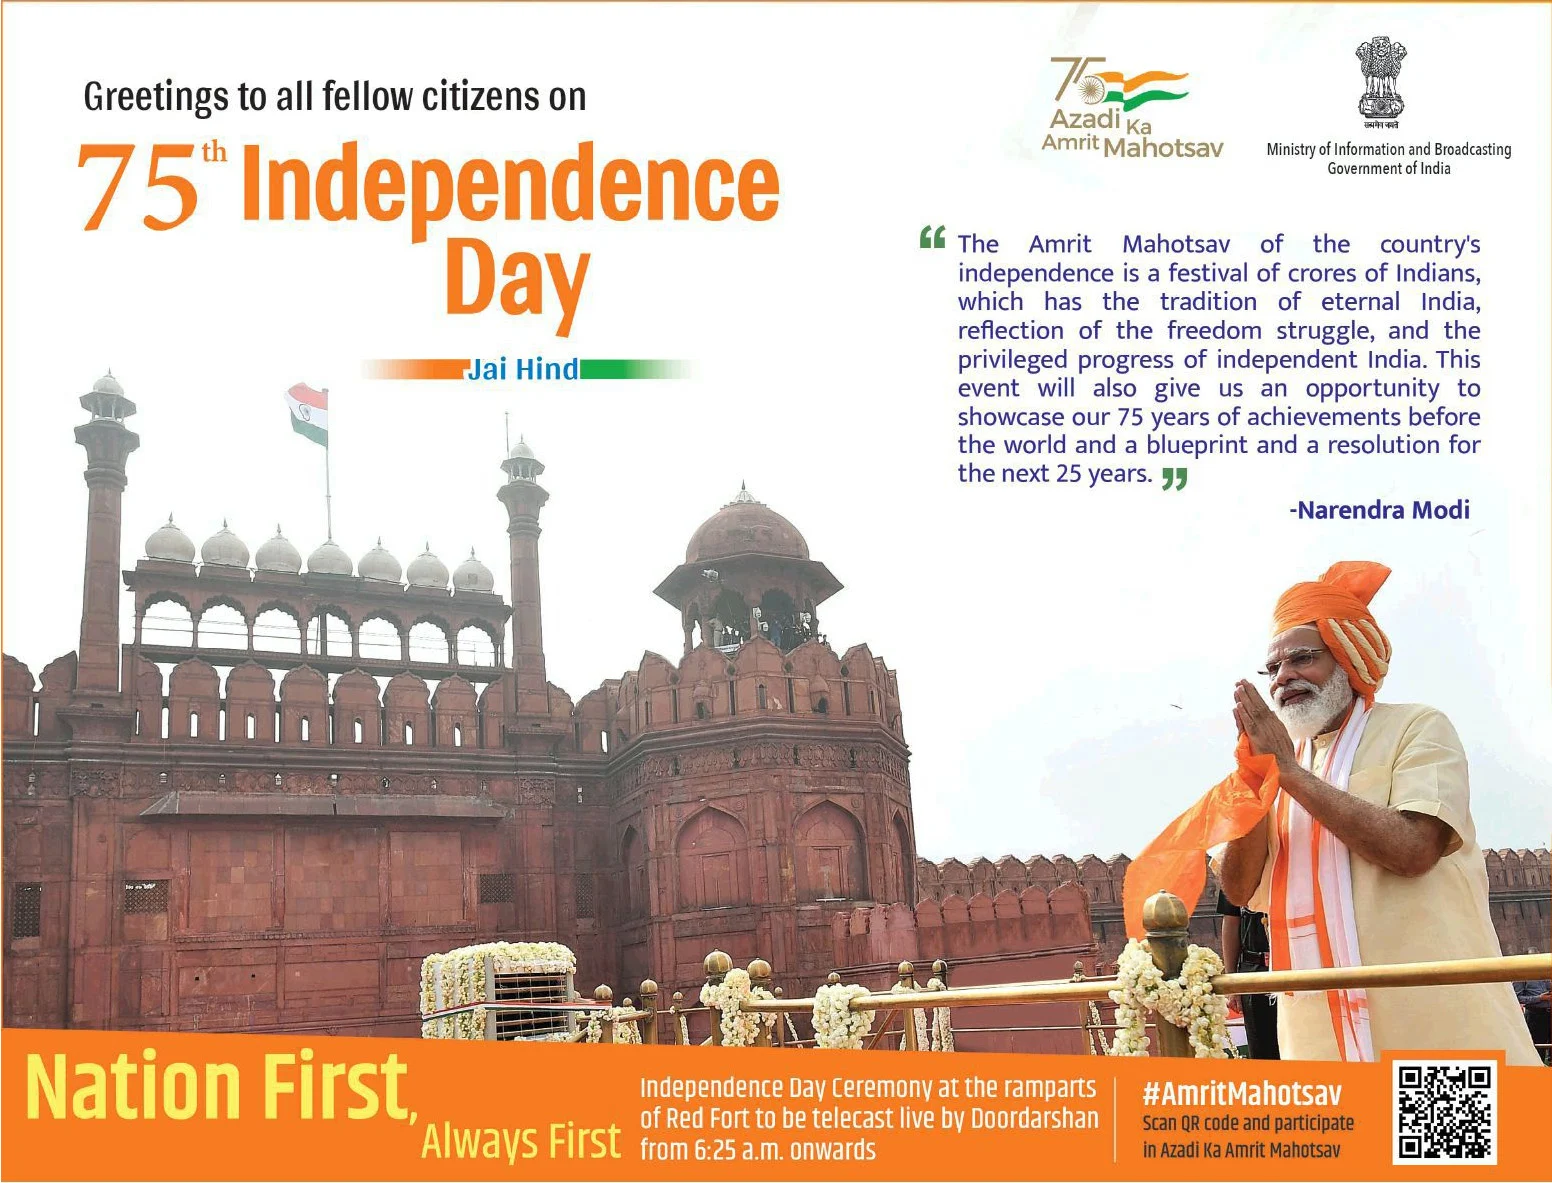 #10 Ministry of Information and Broadcasting Greeting to all fellow citizens on 75th Independence Day